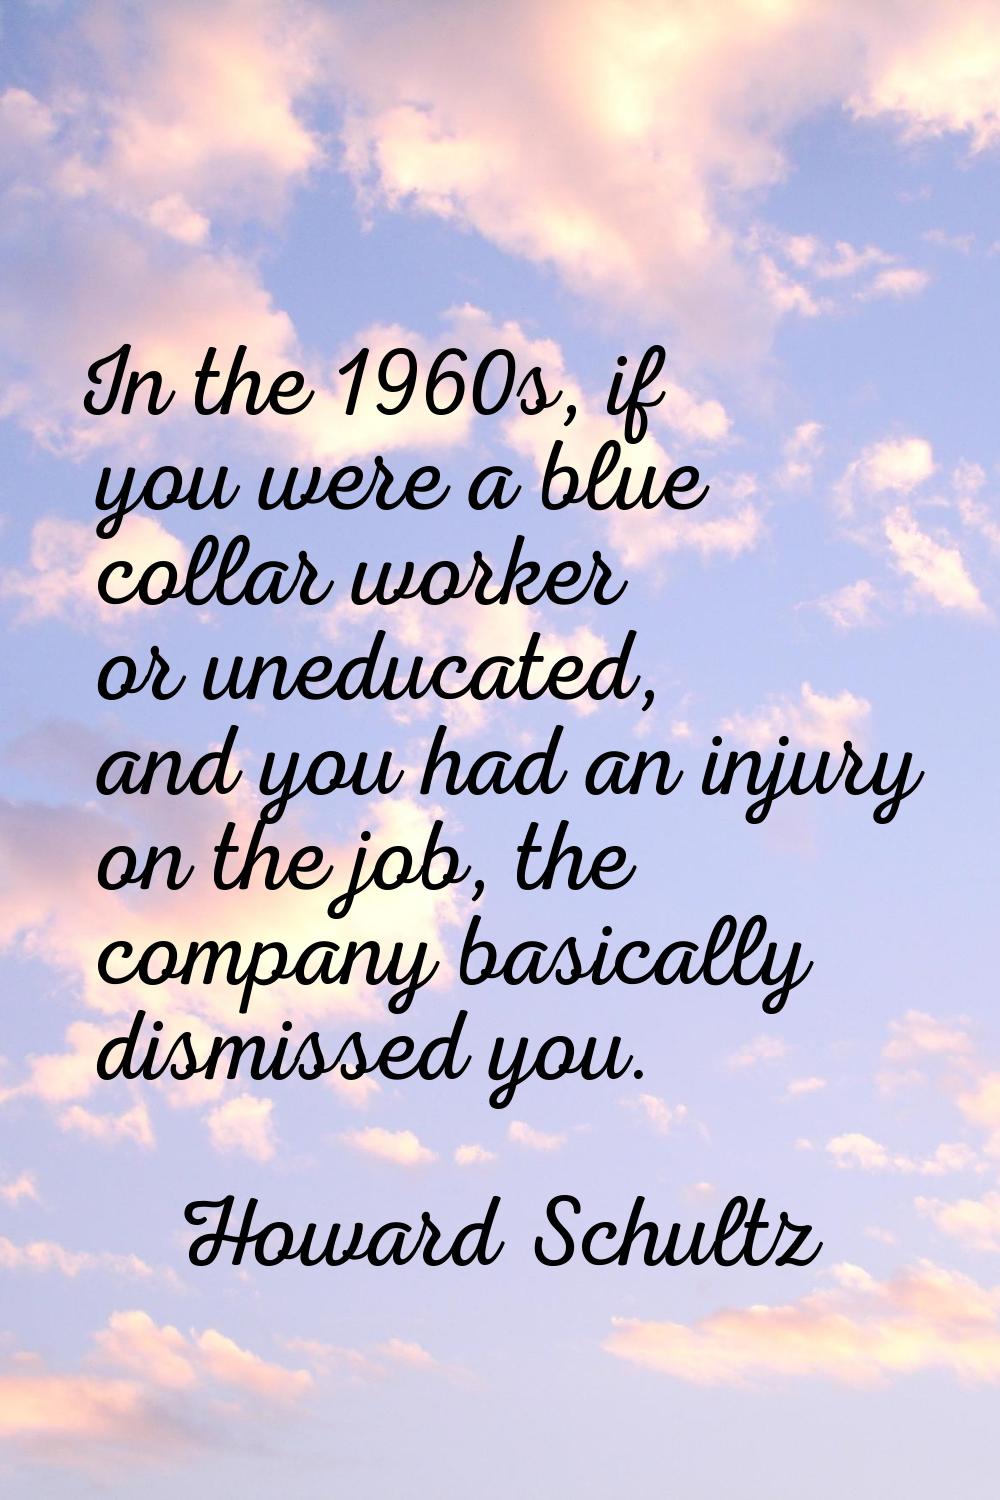 In the 1960s, if you were a blue collar worker or uneducated, and you had an injury on the job, the